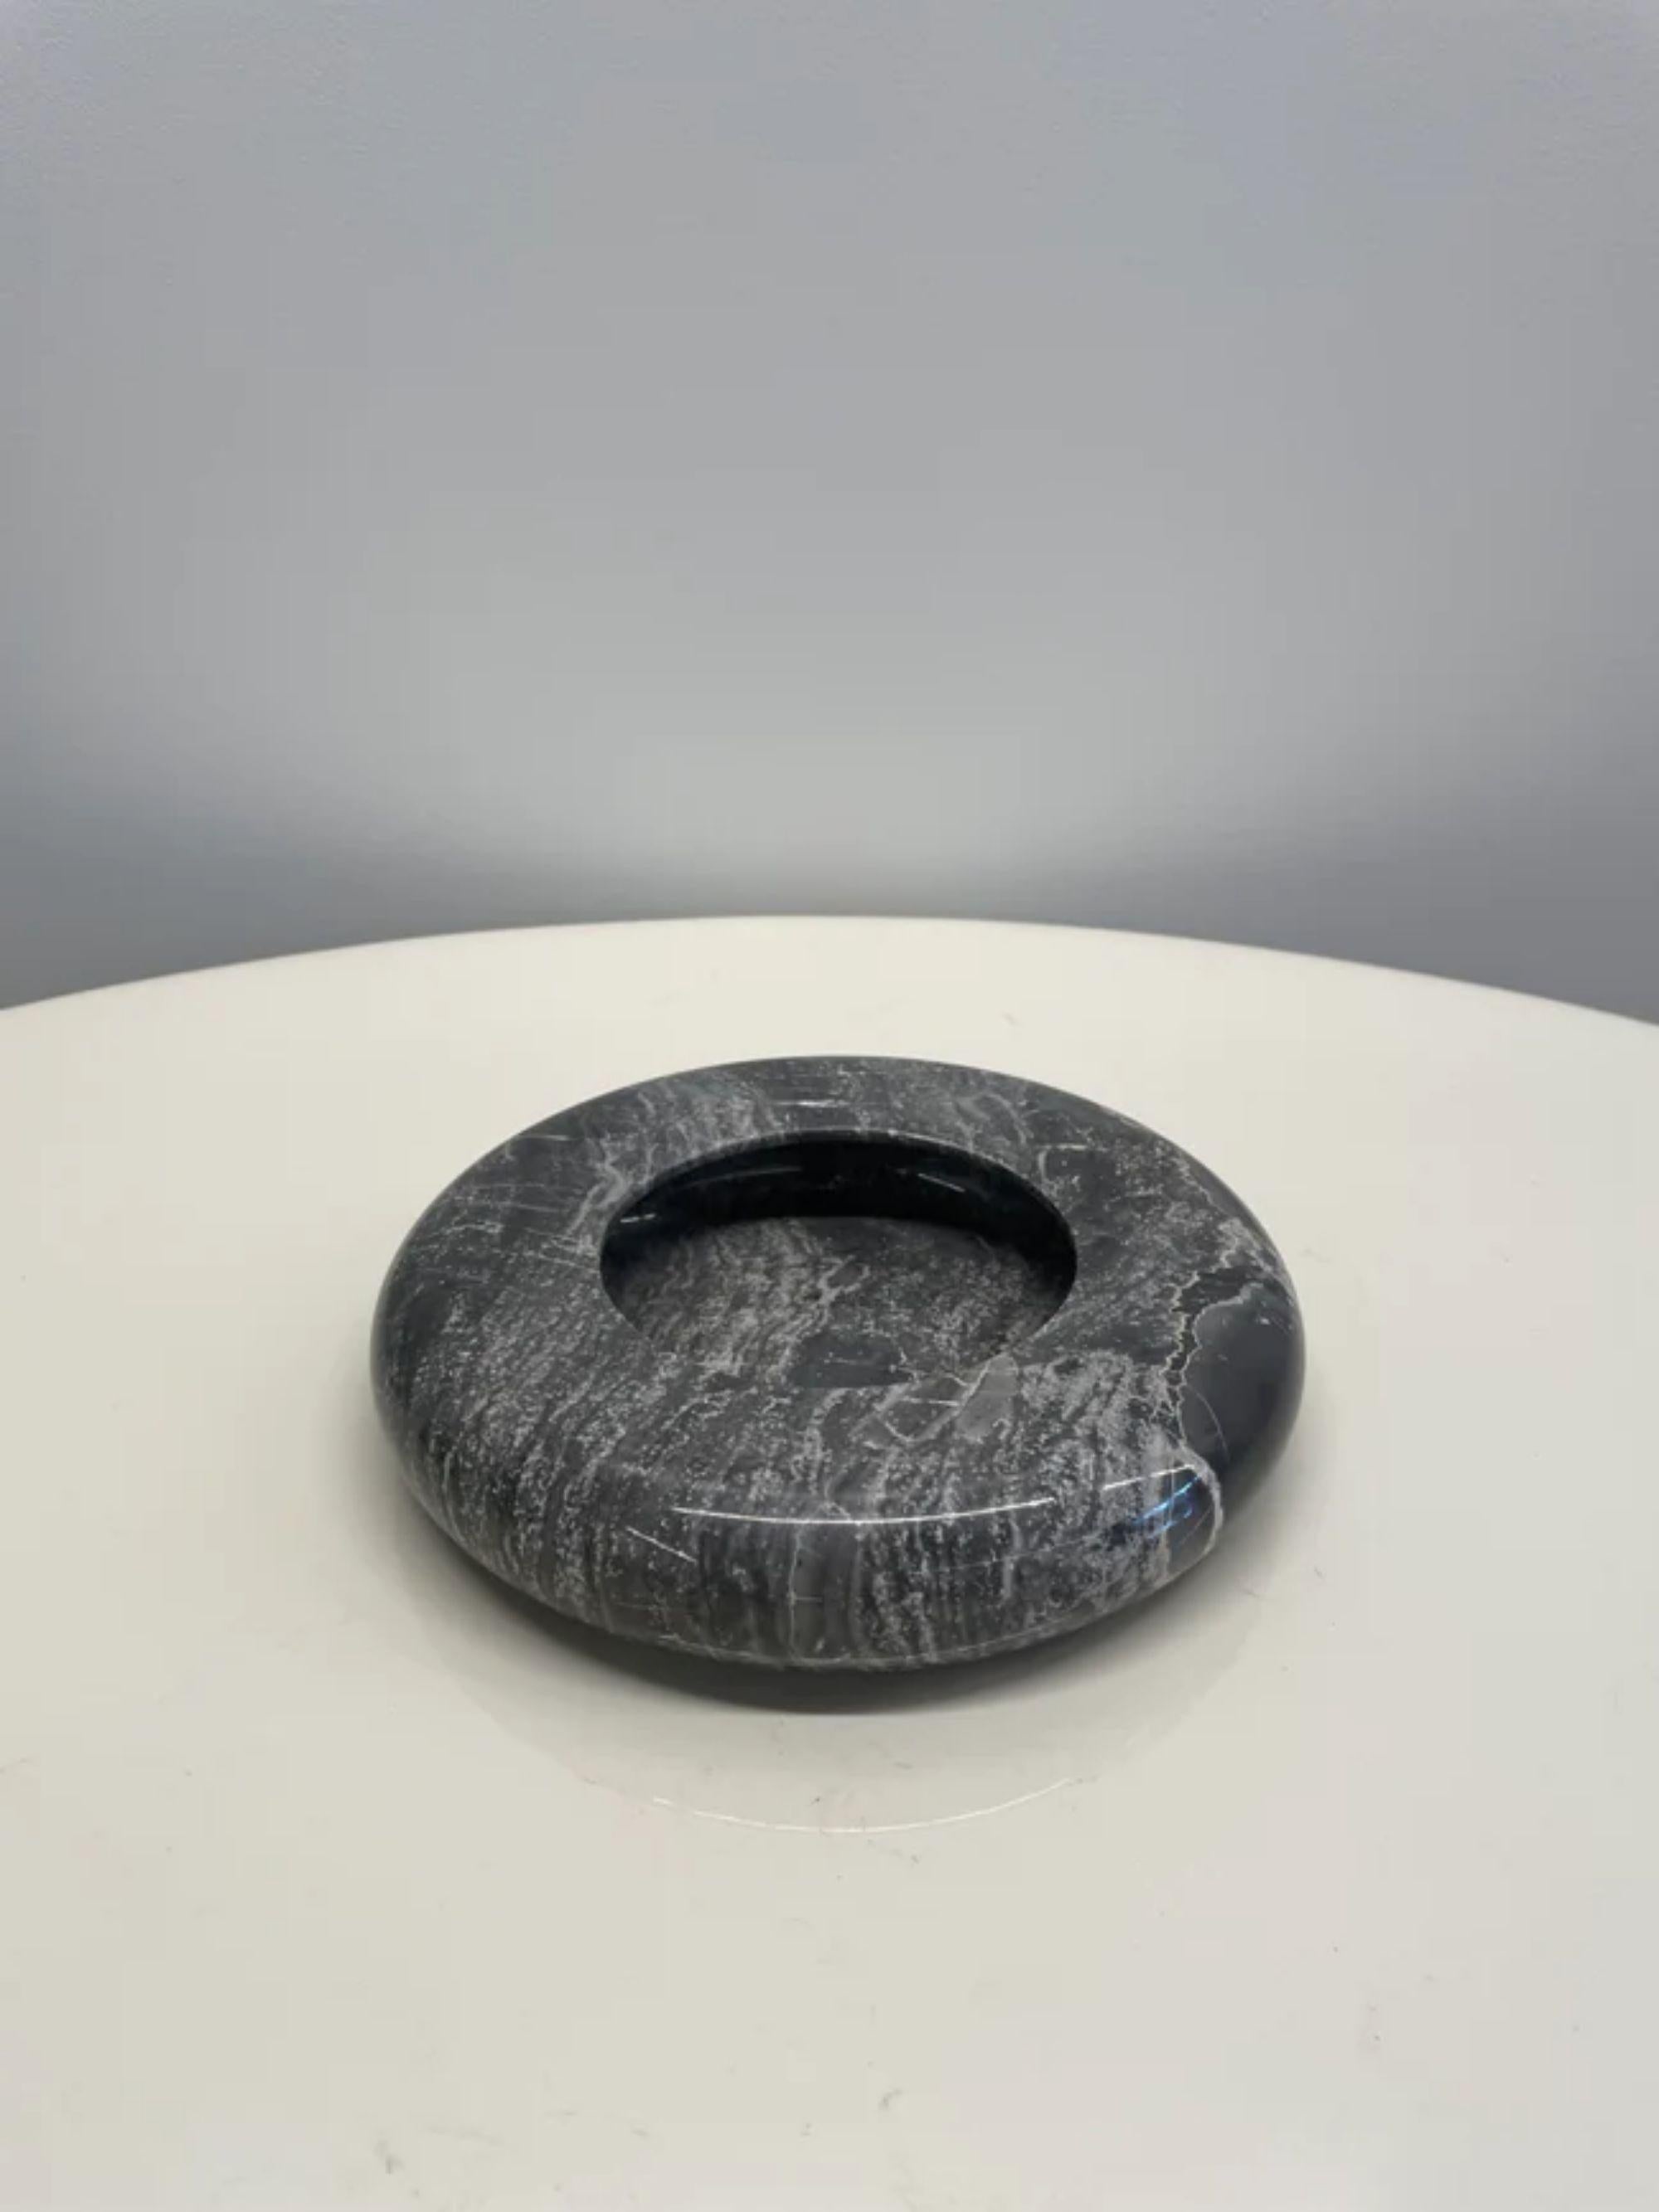 Egidio Di Rosa and Pier Alessandro Giusti marble bowl for UP & UP, Italy, 1960s

Additional Information:
Materials: Marble
Dimensions: 1 1/2” H x 7 3/4” Dia.
Condition: Excellent. Retains original stickers.